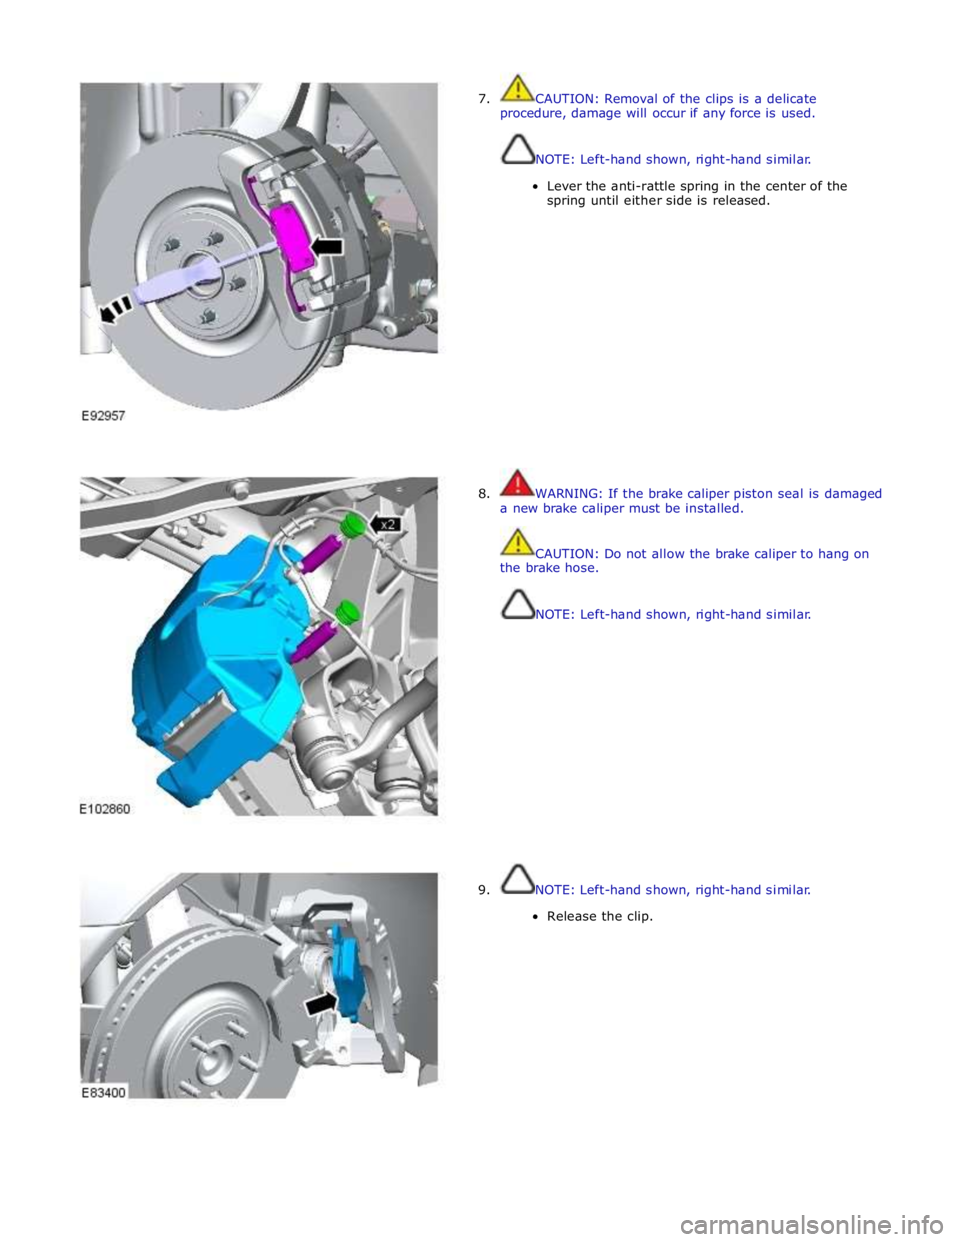 JAGUAR XFR 2010 1.G Workshop Manual  
7.  CAUTION: Removal of the clips is a delicate 
procedure, damage will occur if any force is used. 
 
 
NOTE: Left-hand shown, right-hand similar. 
 
Lever the anti-rattle spring in the center of t